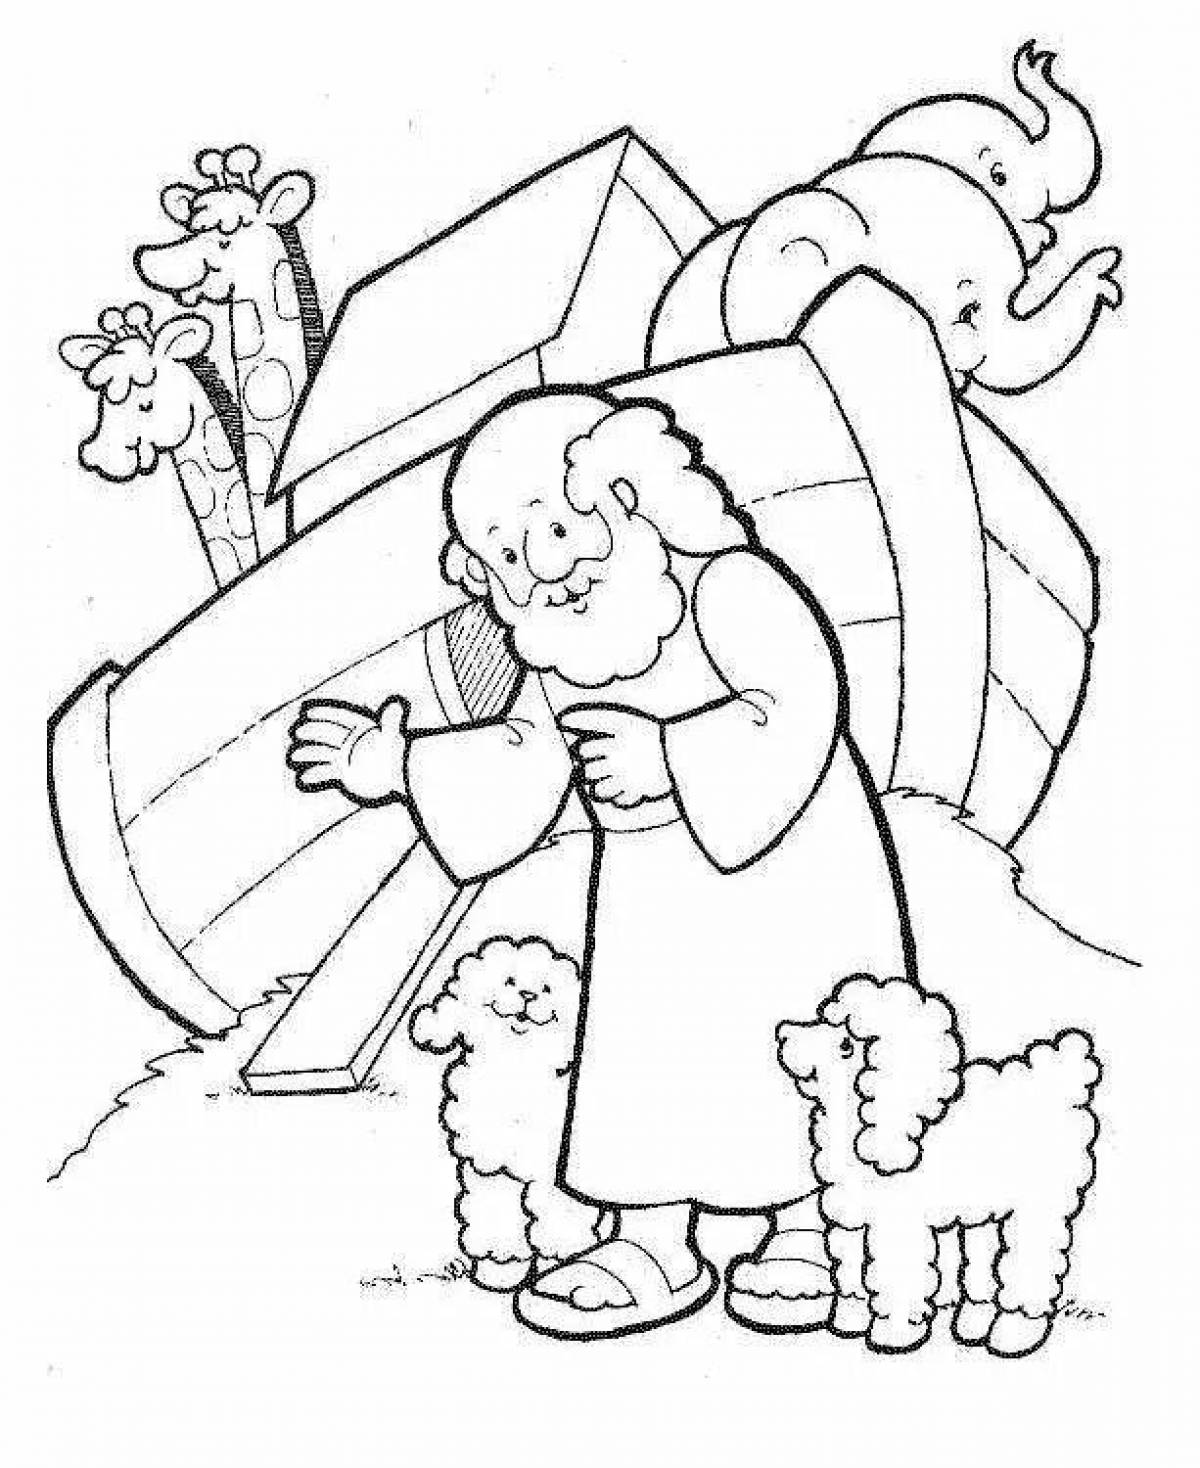 Playful christian children's coloring